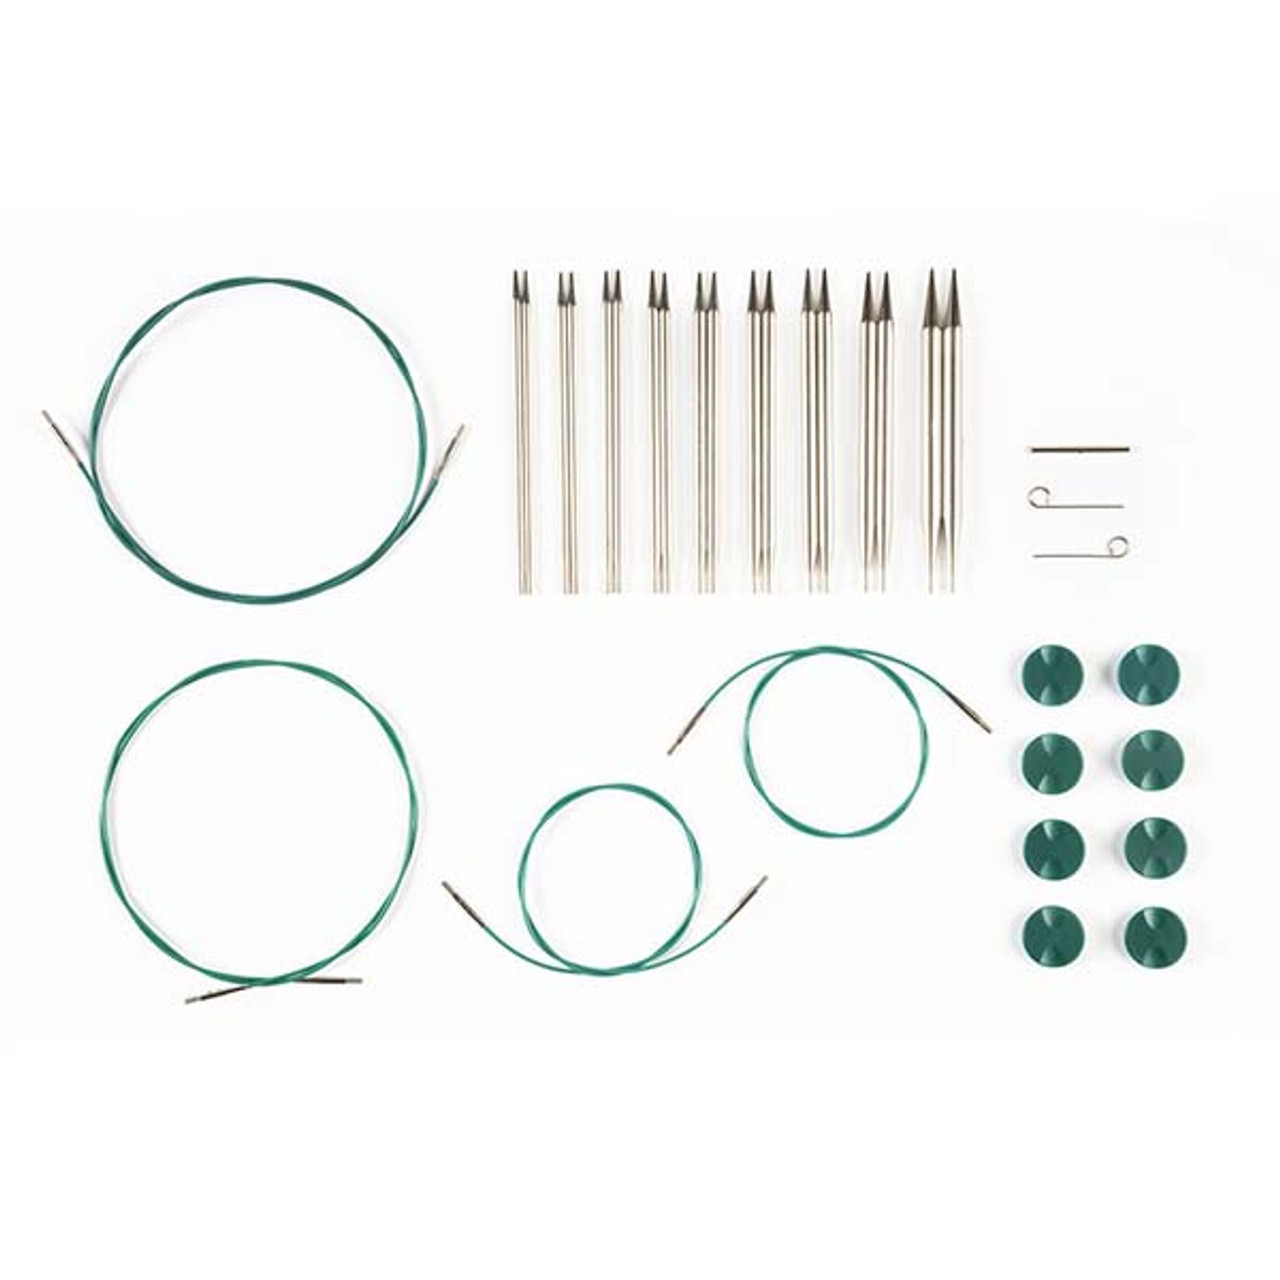 Nickel options Interchangeable Circular Set Green Cables